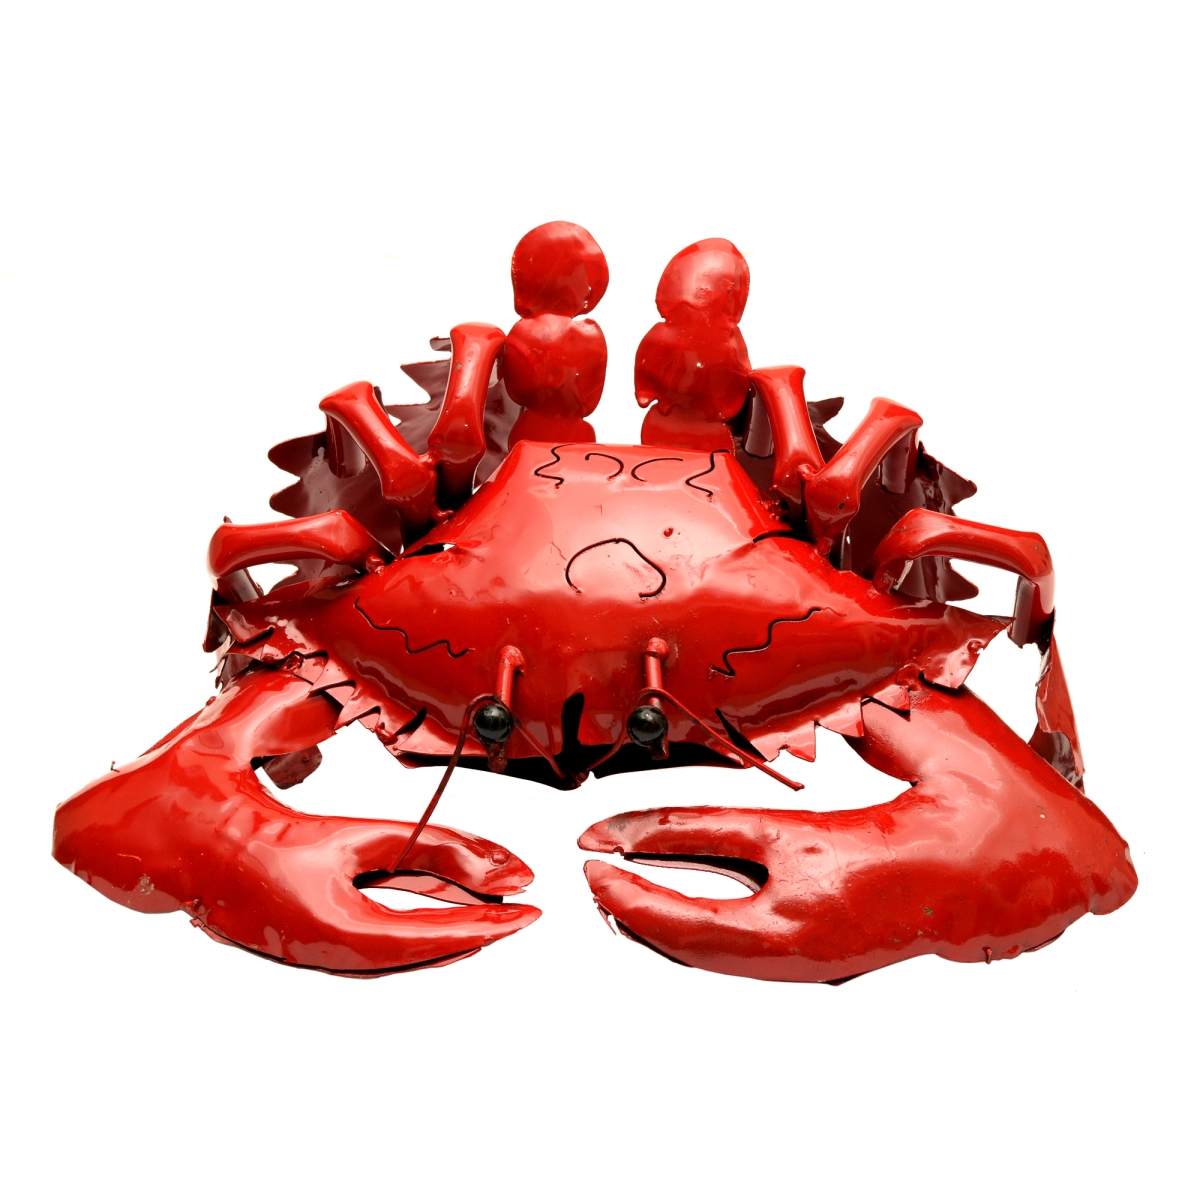 10086 16 X 19 In. Crab For Decor - Small